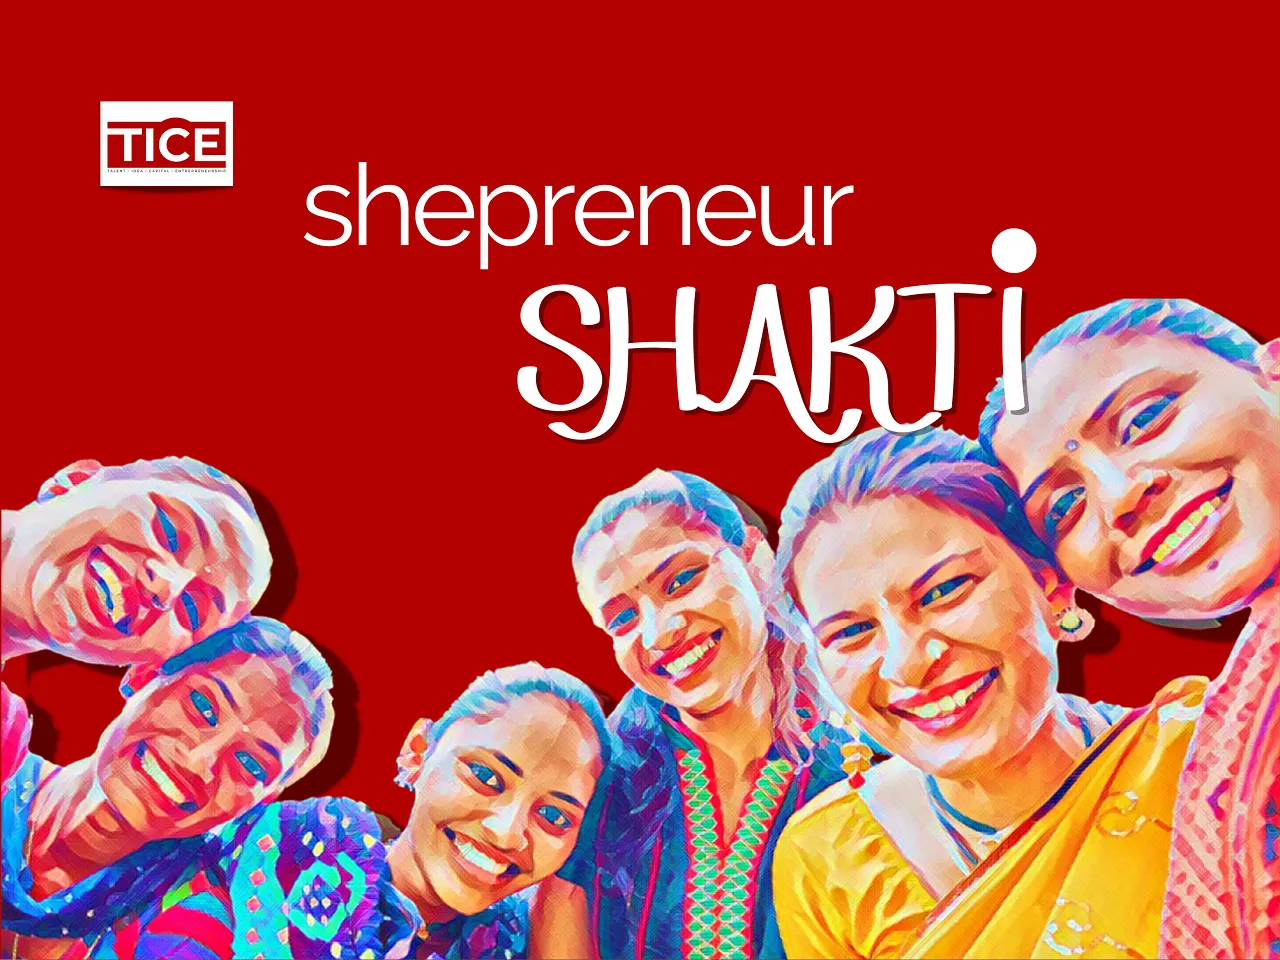 How Shepreneurs Can Build a Thriving Entrepreneurial Nation: EdelGive Report